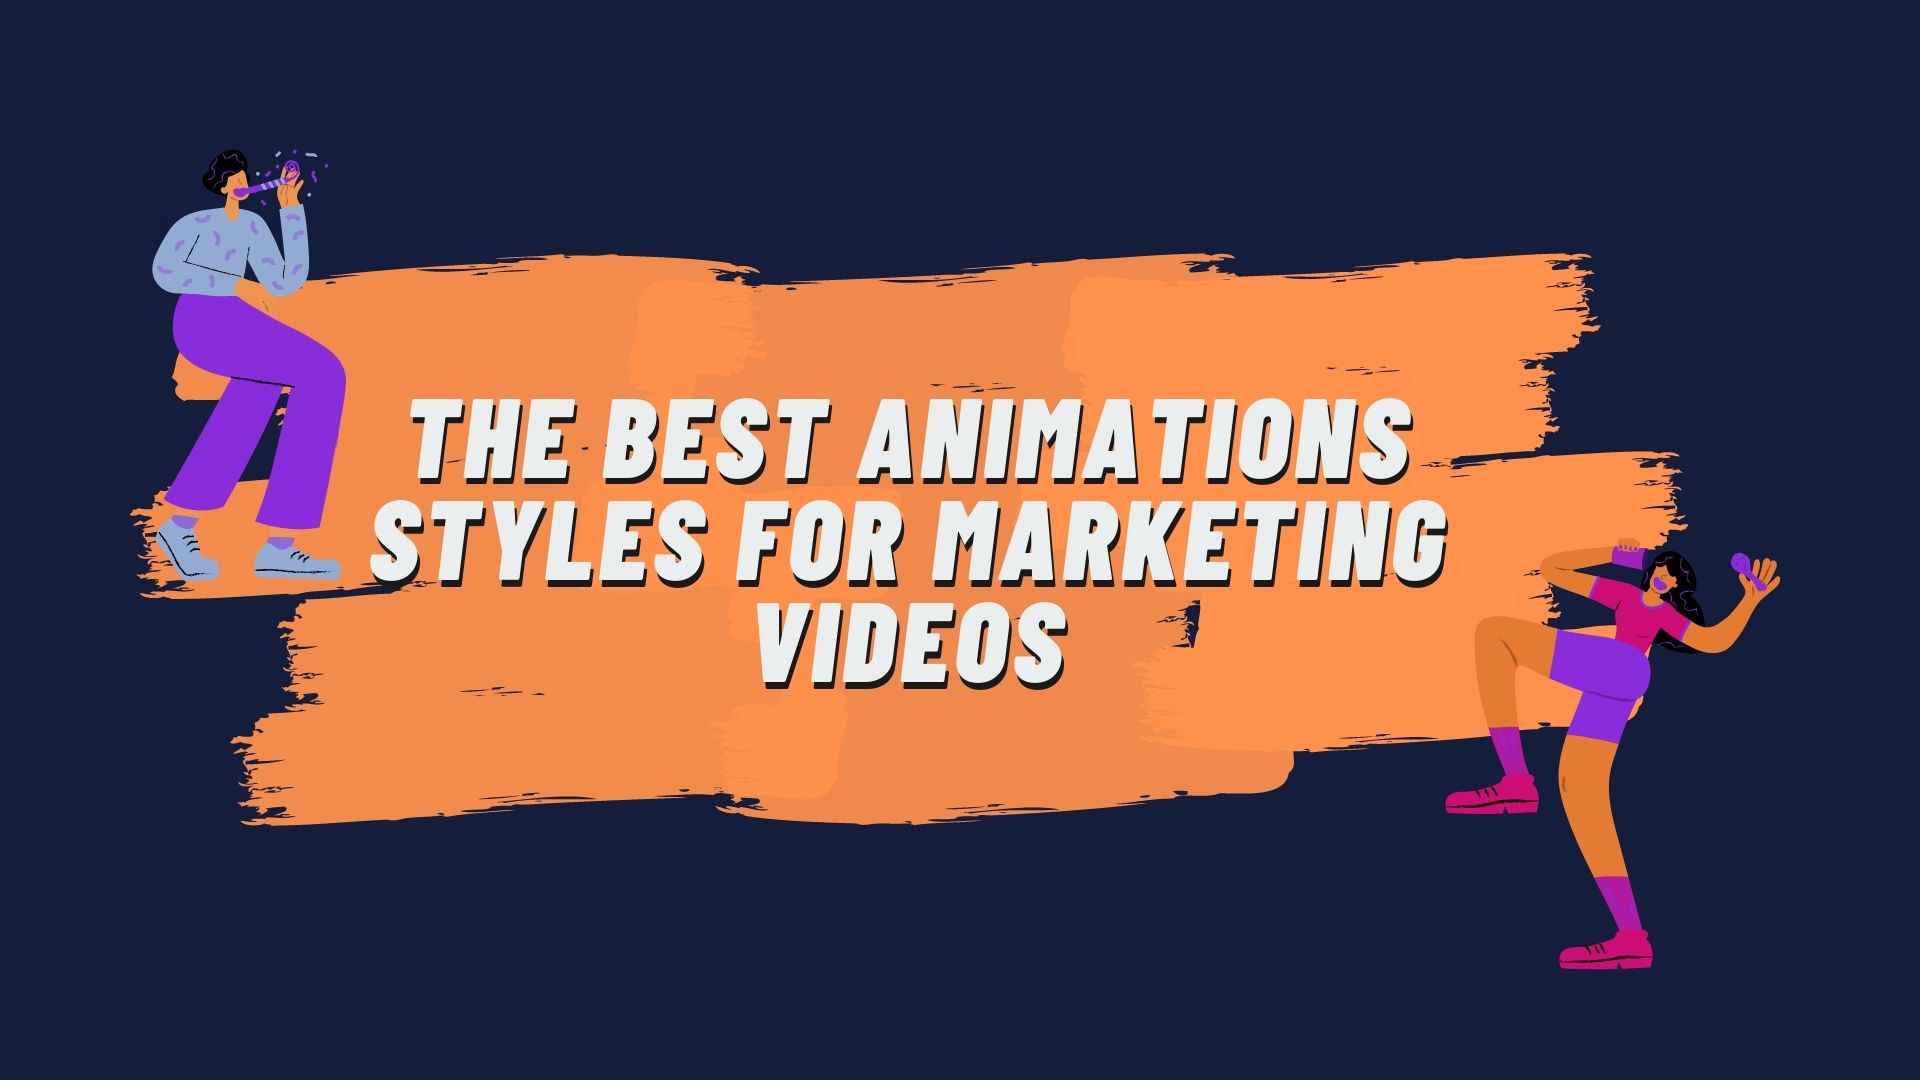 The best animations styles for marketing videos